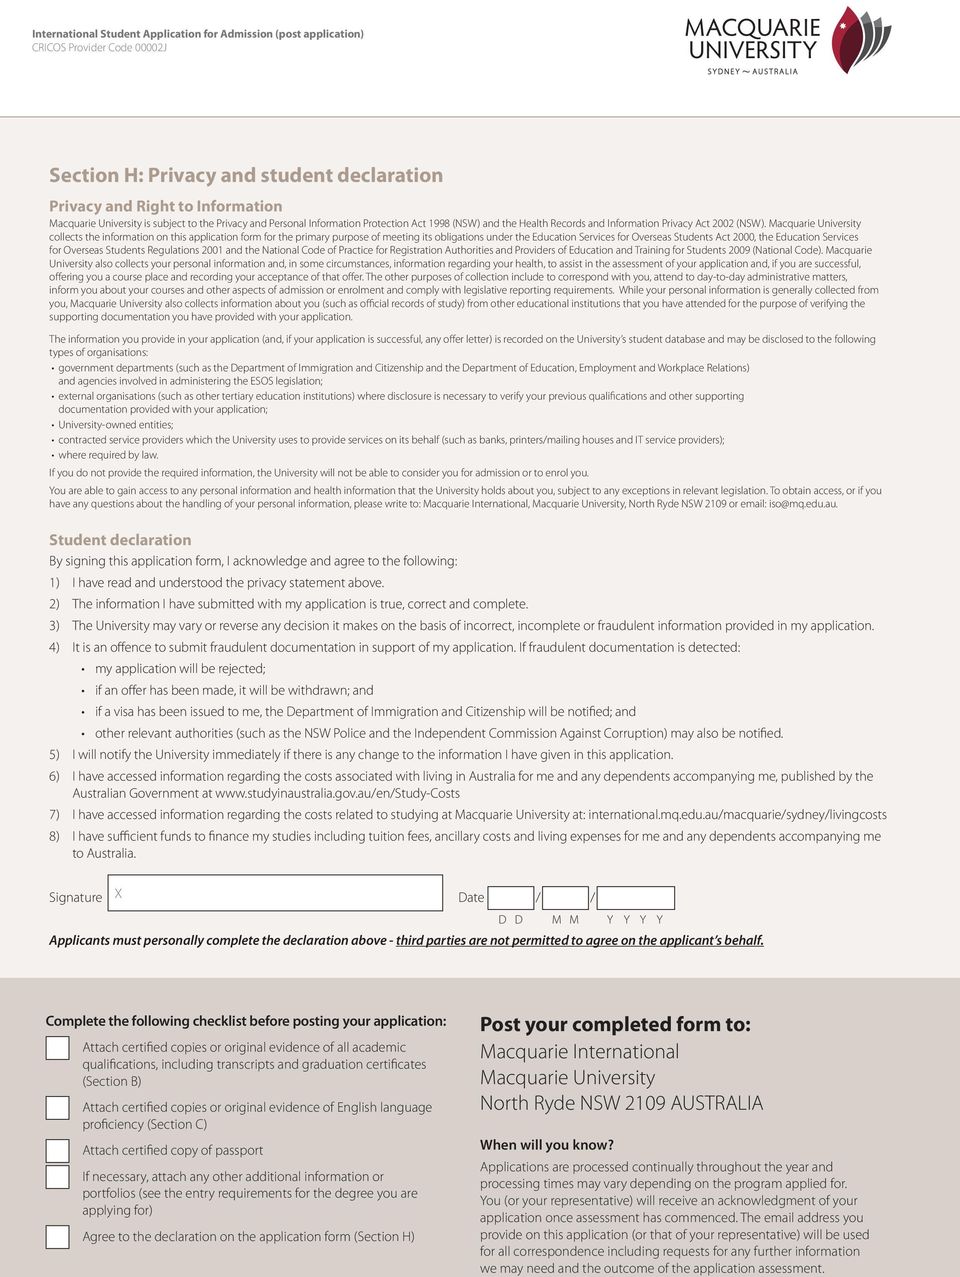 Macquarie University collects the information on this application form for the primary purpose of meeting its obligations under the Education Services for Overseas Students Act 2000, the Education